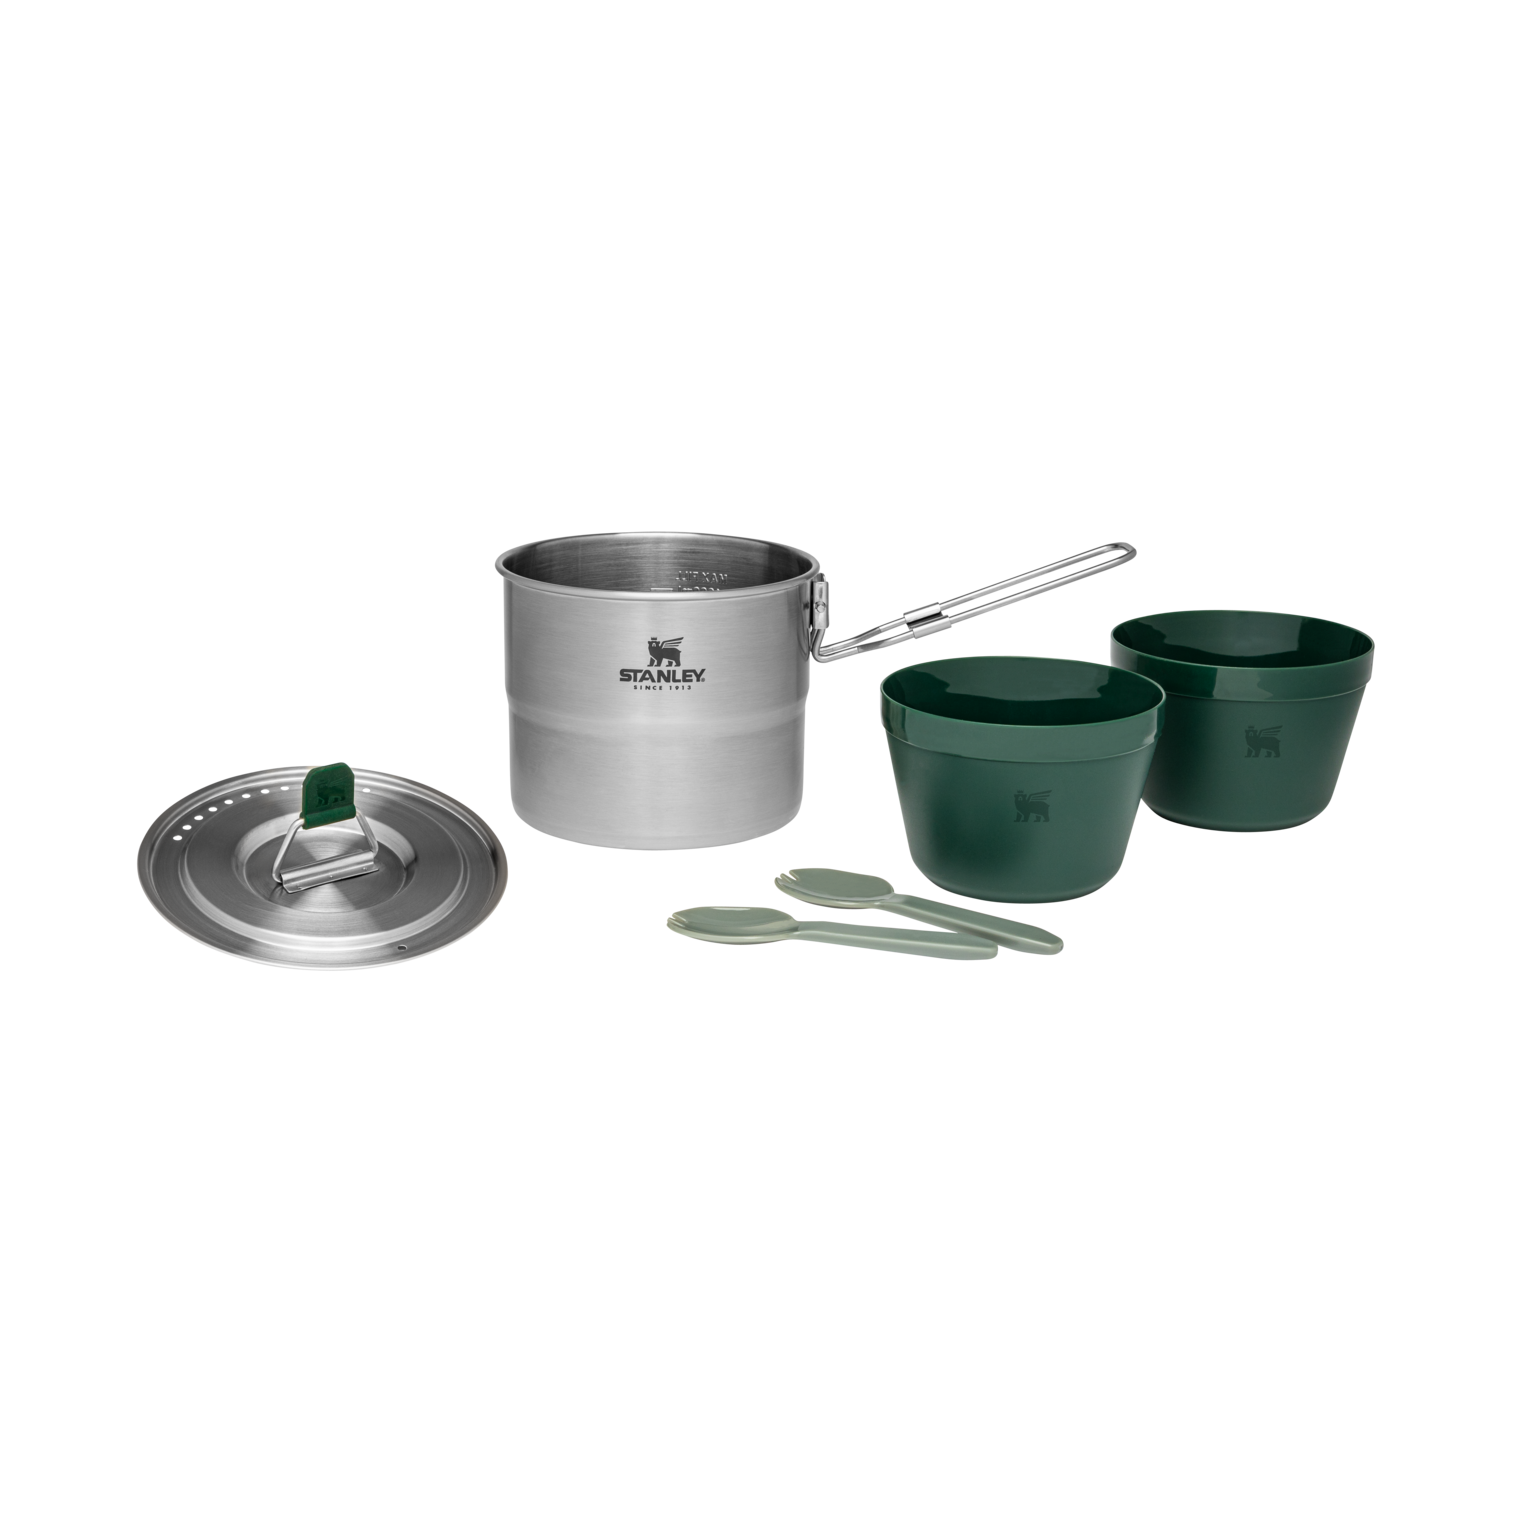 Adventure Stainless Steel Cookset For Two | 1.1 QT: Stainless Steel